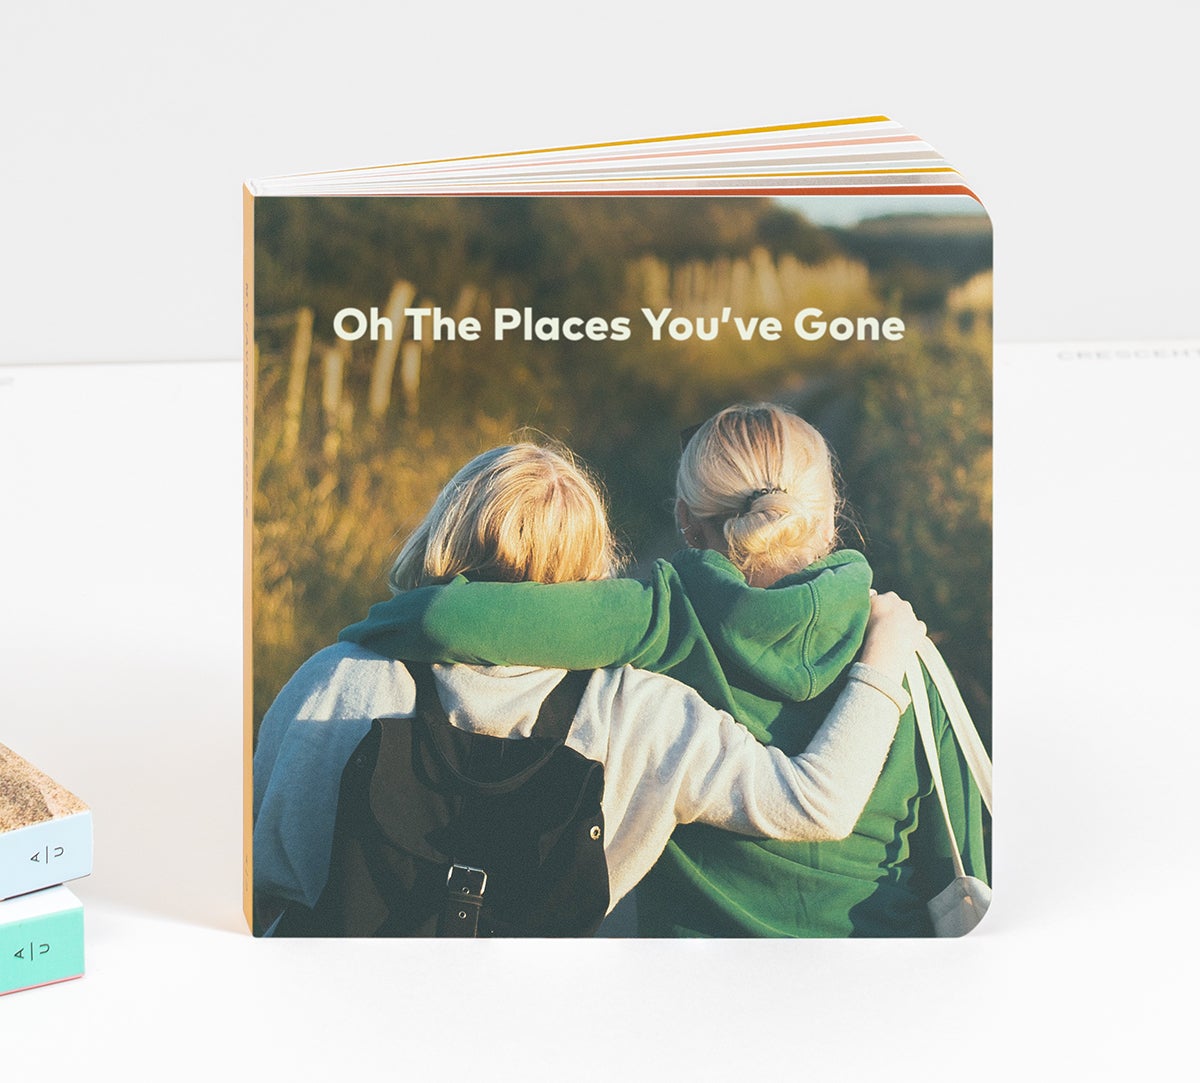 Artifact Uprising Baby Board Book titled Oh the Places You’ve Gone with photo of two young friends on cover